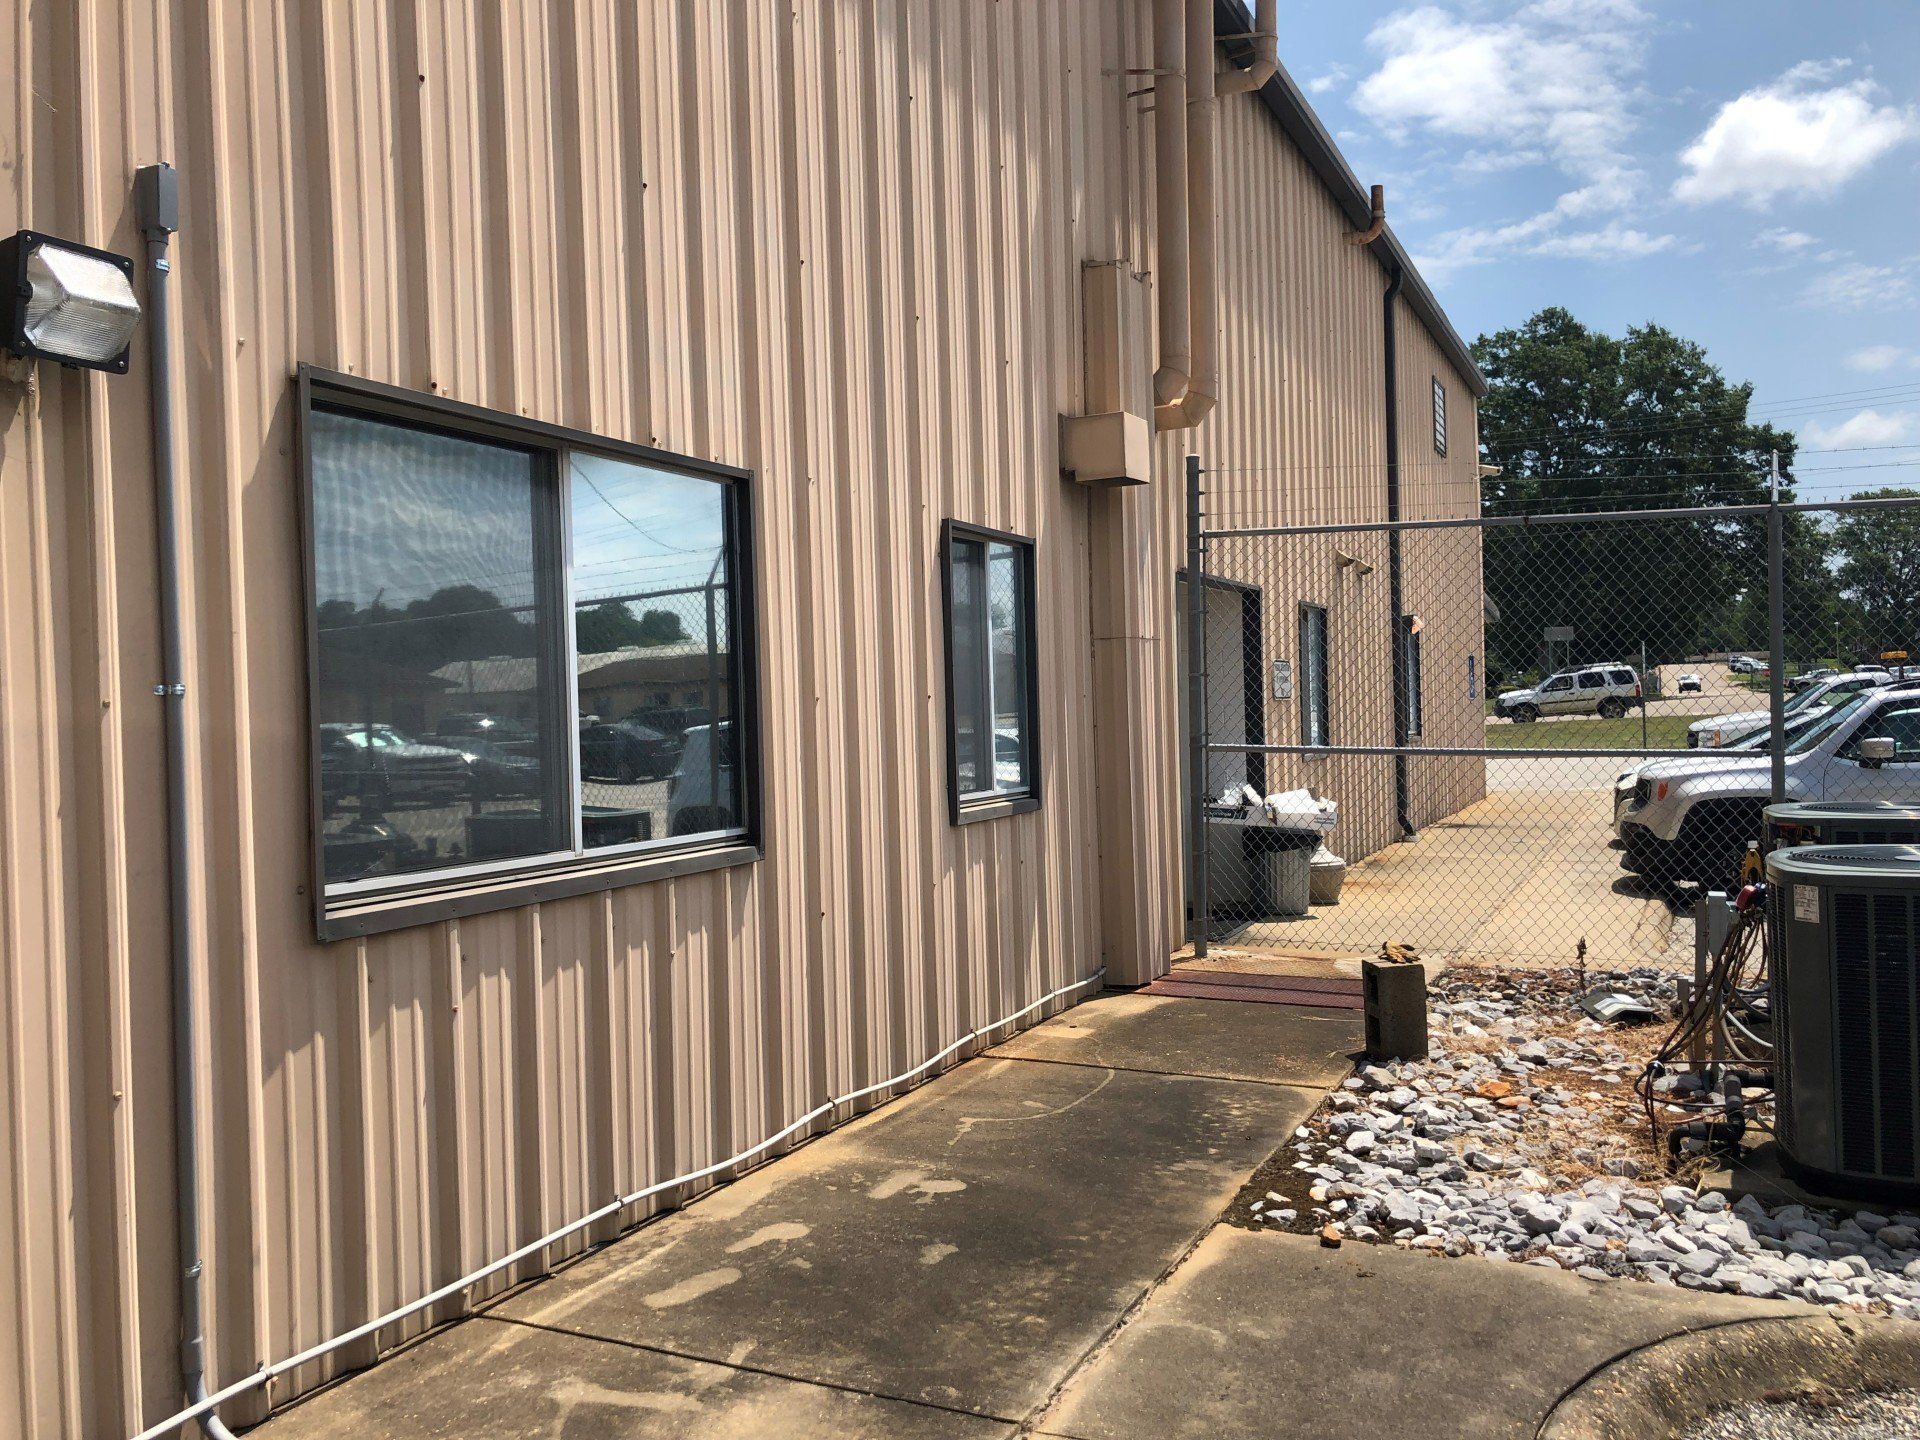 Professional Tinting in Troy, AL - DOT Office tinted blocked heat from windows on 7.8.2019